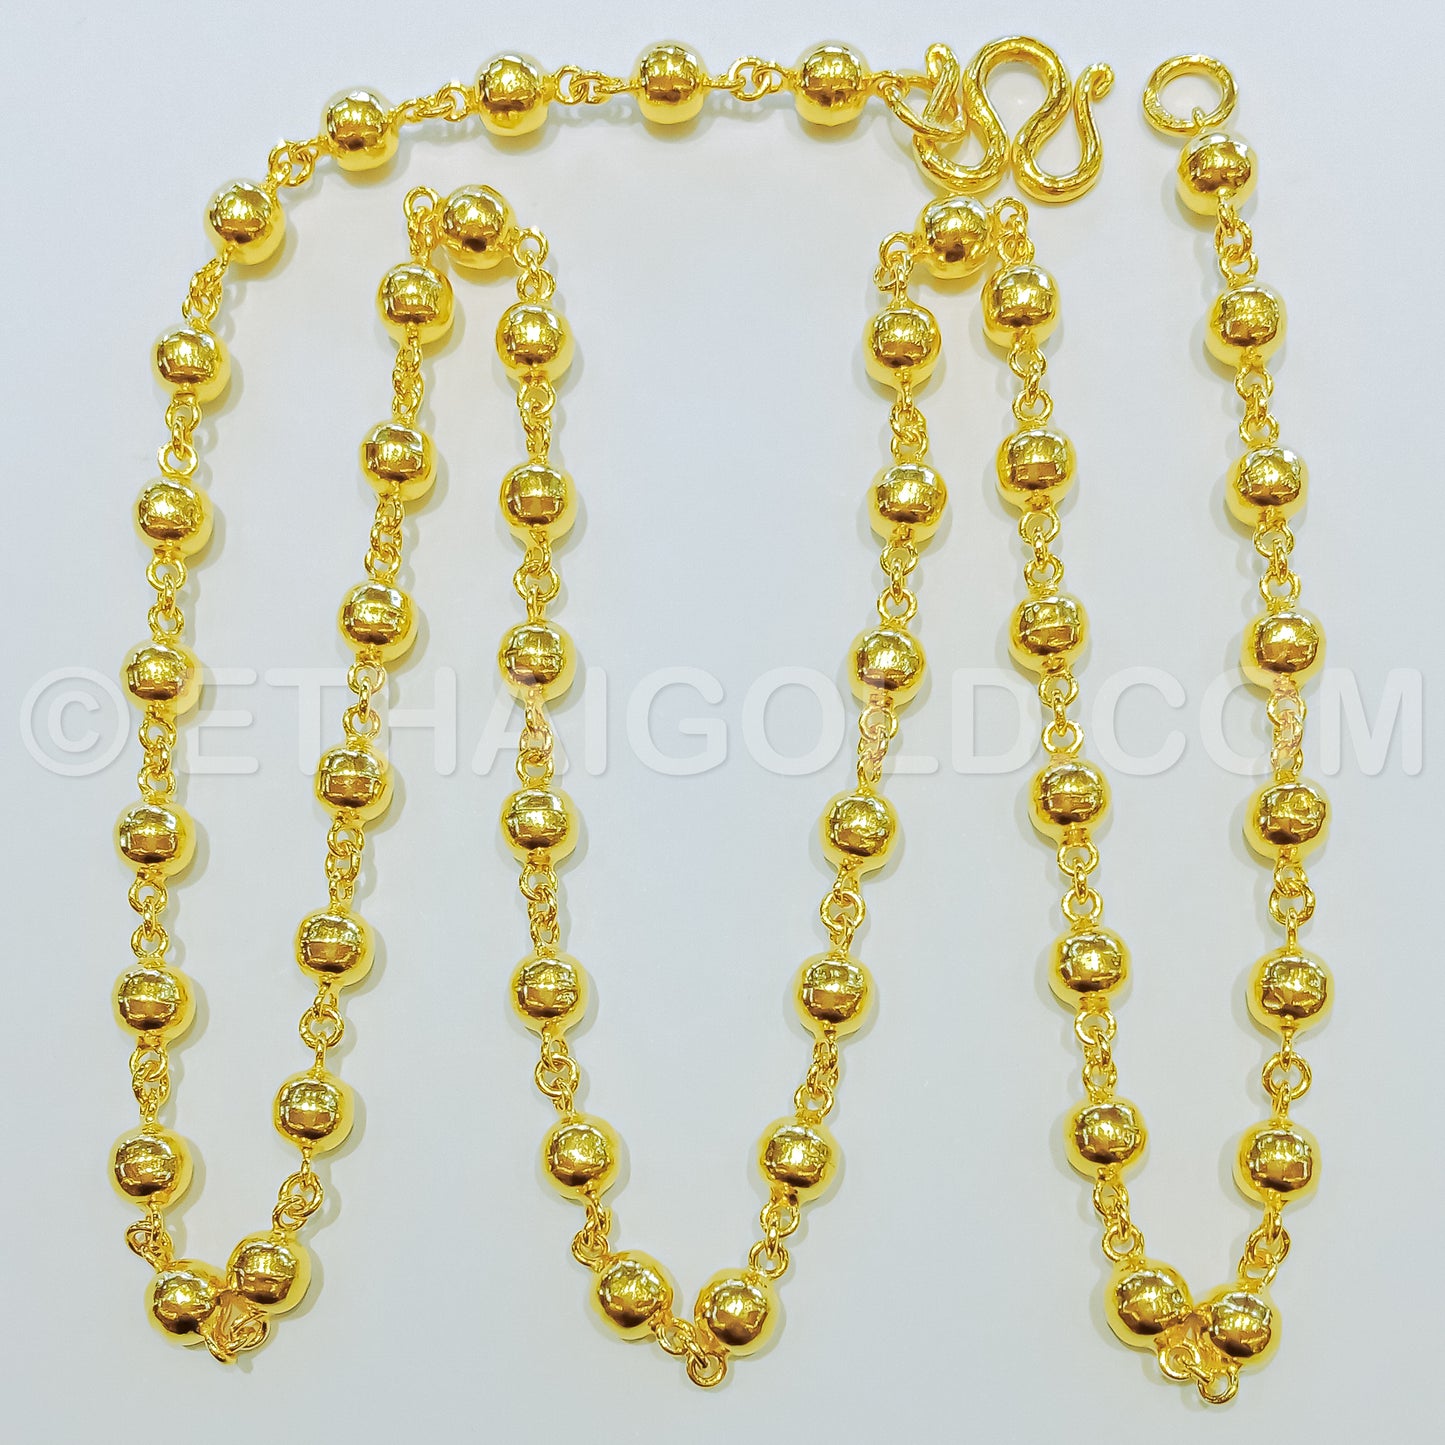 4 BAHT POLISHED HOLLOW ROSARY BEAD CHAIN NECKLACE IN 23K GOLD (ID: N3504B)